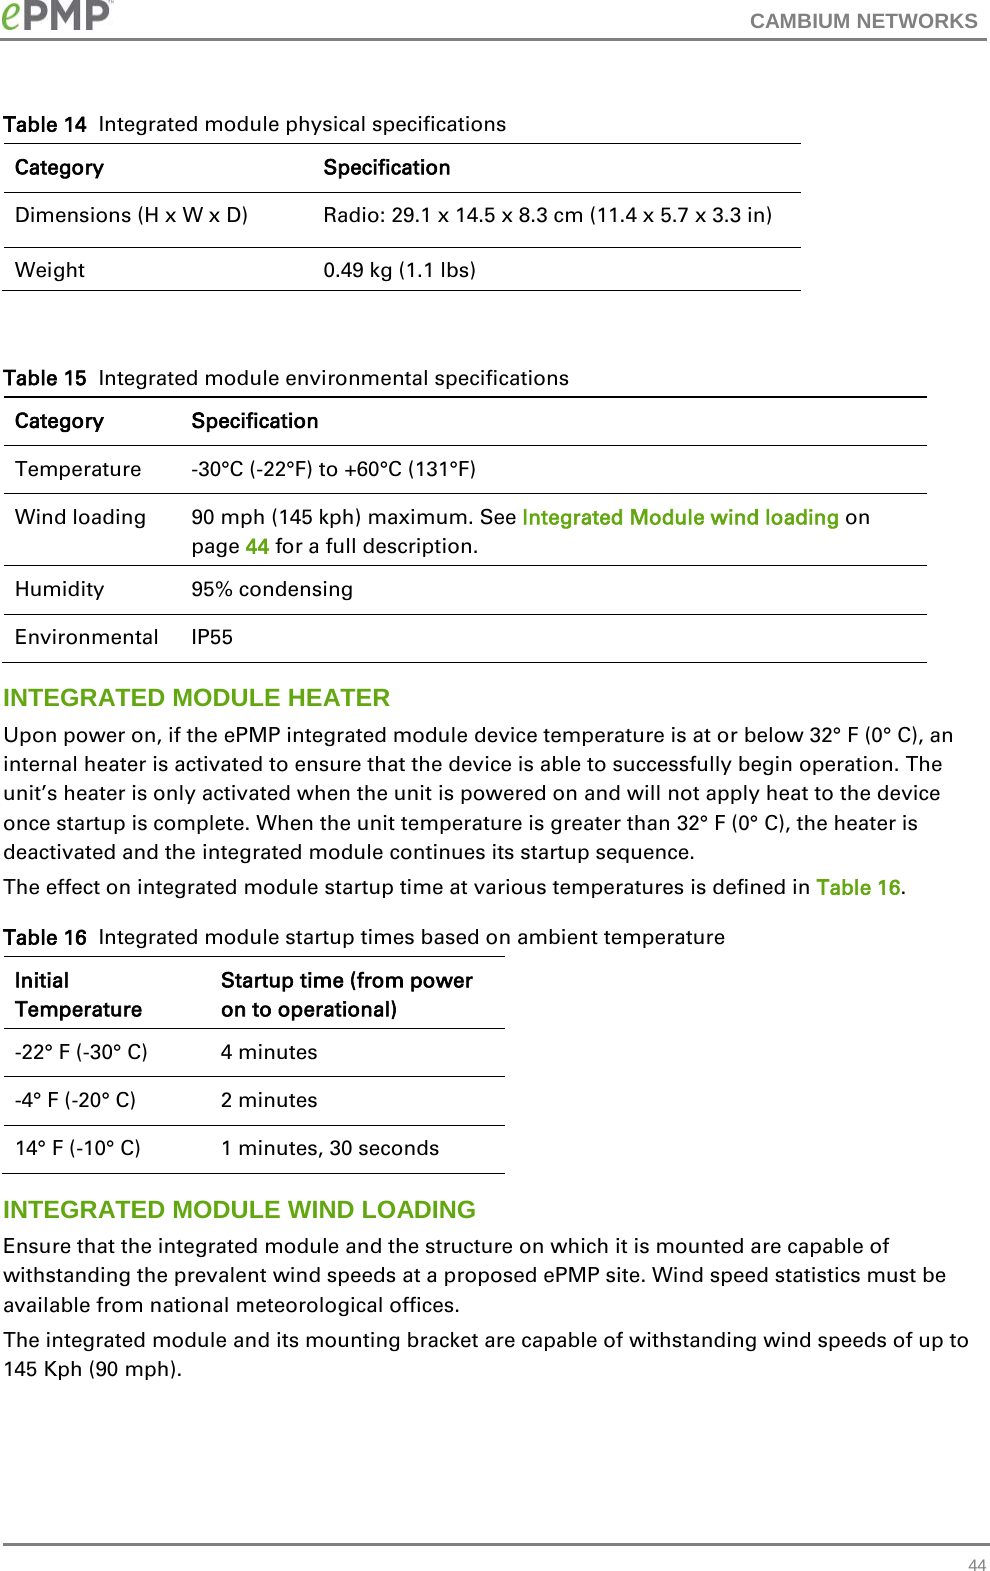 CAMBIUM NETWORKS  Table 14  Integrated module physical specifications Category Specification Dimensions (H x W x D)   Radio: 29.1 x 14.5 x 8.3 cm (11.4 x 5.7 x 3.3 in) Weight  0.49 kg (1.1 lbs)  Table 15  Integrated module environmental specifications Category Specification Temperature   -30°C (-22°F) to +60°C (131°F) Wind loading  90 mph (145 kph) maximum. See Integrated Module wind loading on page 44 for a full description. Humidity  95% condensing Environmental IP55 INTEGRATED MODULE HEATER Upon power on, if the ePMP integrated module device temperature is at or below 32° F (0° C), an internal heater is activated to ensure that the device is able to successfully begin operation. The unit’s heater is only activated when the unit is powered on and will not apply heat to the device once startup is complete. When the unit temperature is greater than 32° F (0° C), the heater is deactivated and the integrated module continues its startup sequence. The effect on integrated module startup time at various temperatures is defined in Table 16. Table 16  Integrated module startup times based on ambient temperature Initial Temperature Startup time (from power on to operational) -22° F (-30° C) 4 minutes -4° F (-20° C) 2 minutes 14° F (-10° C) 1 minutes, 30 seconds INTEGRATED MODULE WIND LOADING Ensure that the integrated module and the structure on which it is mounted are capable of withstanding the prevalent wind speeds at a proposed ePMP site. Wind speed statistics must be available from national meteorological offices. The integrated module and its mounting bracket are capable of withstanding wind speeds of up to 145 Kph (90 mph).  44 